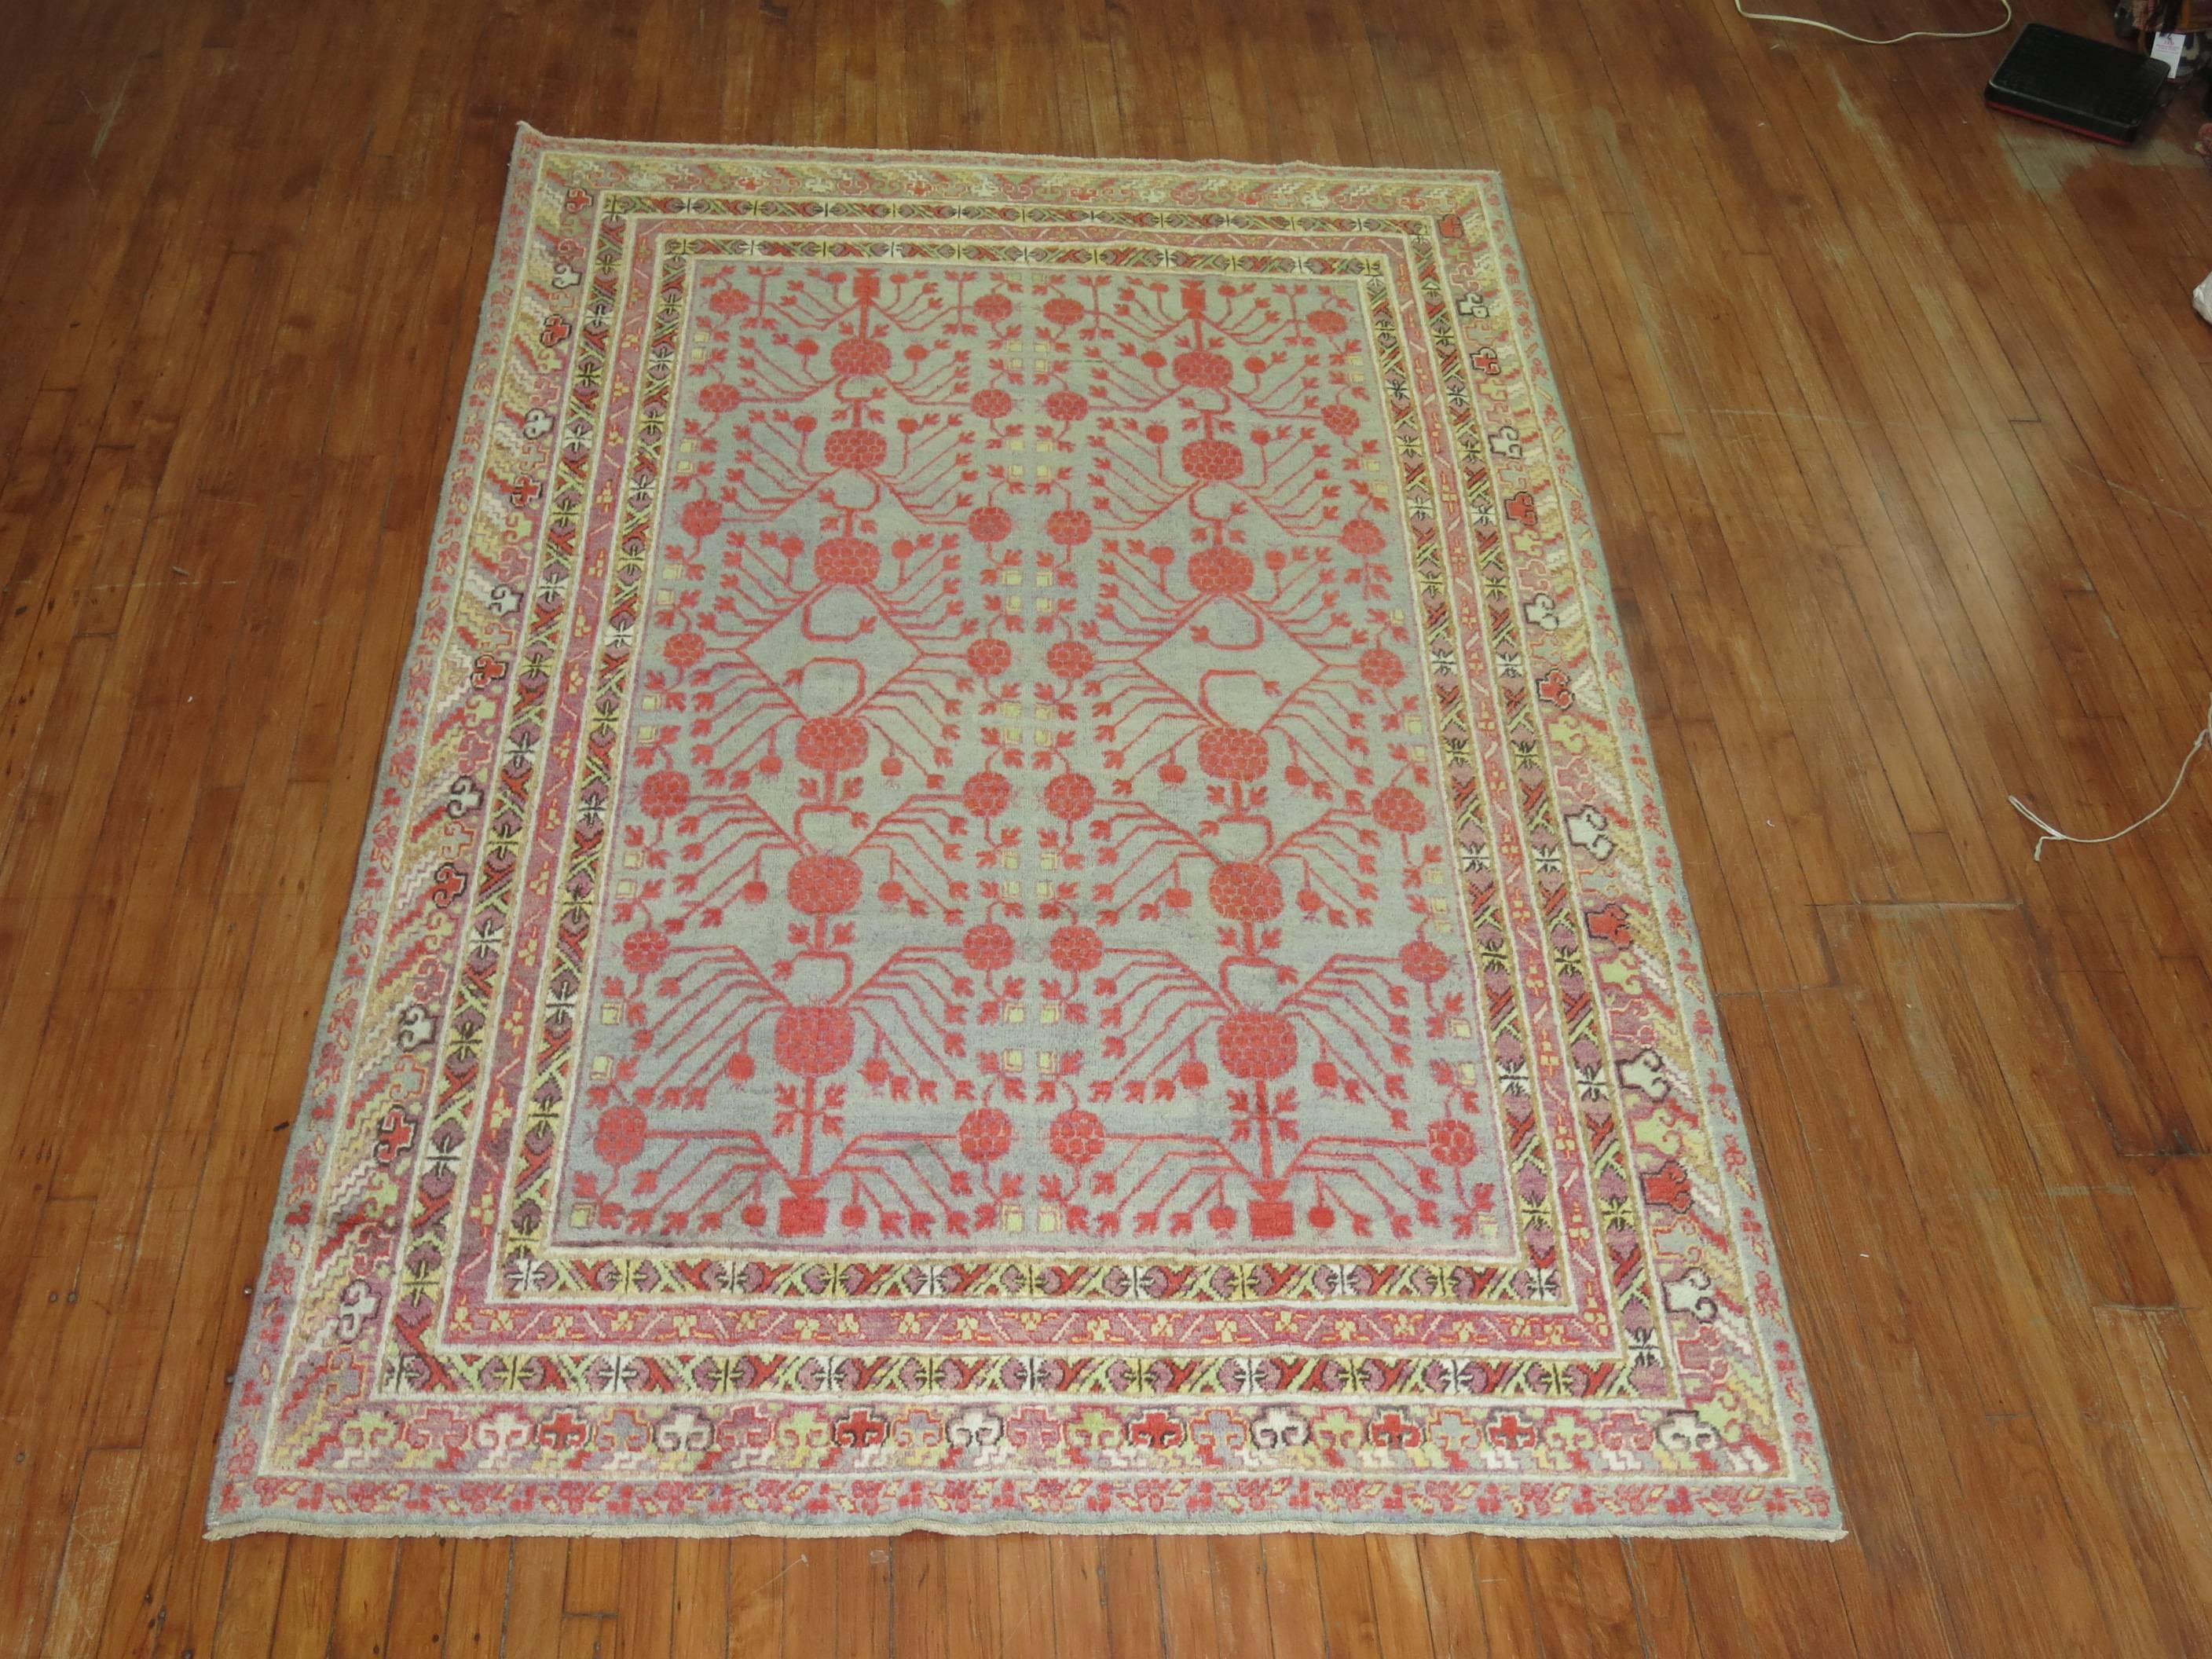 Wool Early 20th Century Khotan Gray Field Red Pomegranate Full Pile Rug For Sale 2